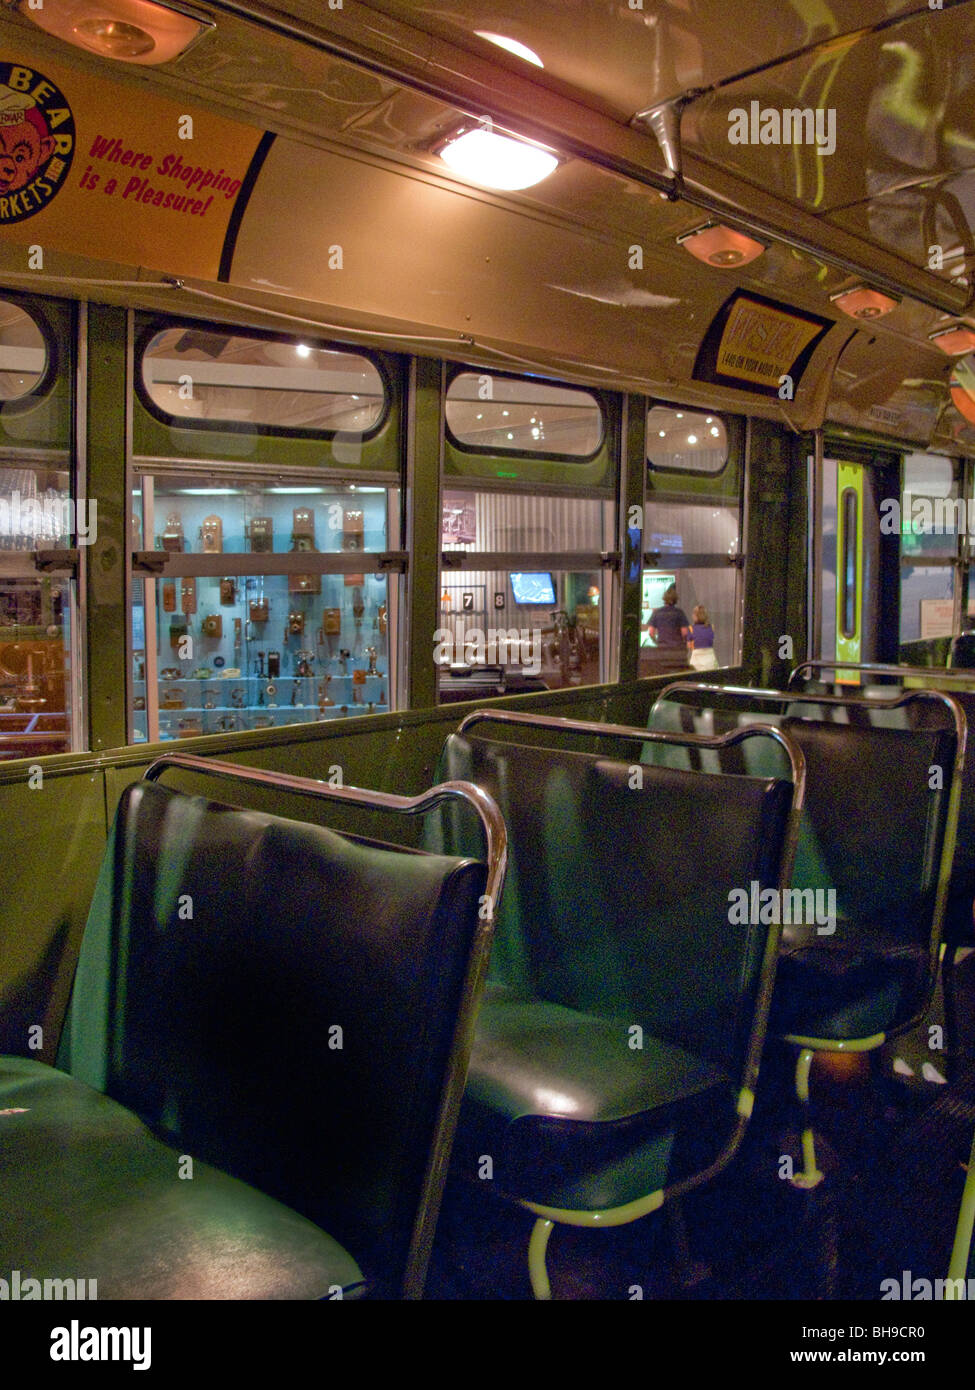 The seat of a Montgomery, Alabama bus which civil rights pioneer Rosa Parks refused to yield to a white passenger in 1955. Stock Photo